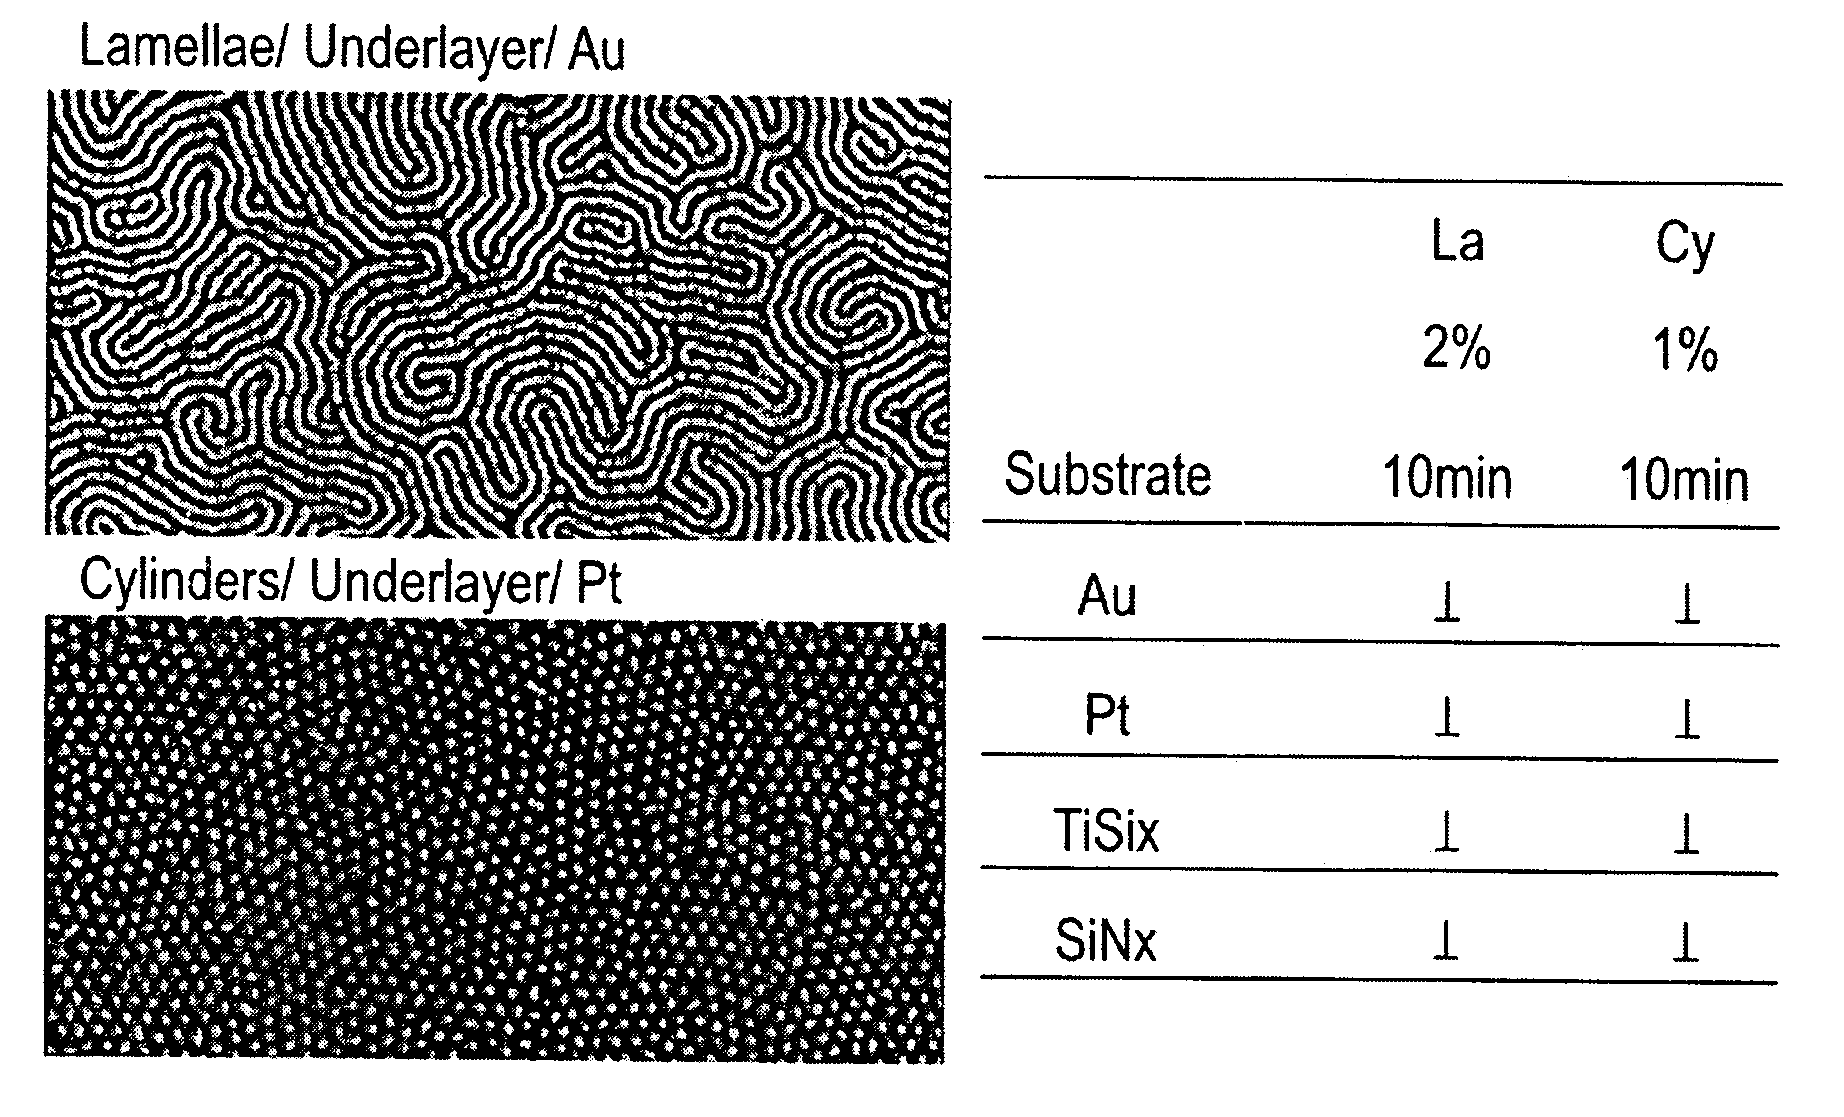 Method of use of epoxy-containing cycloaliphatic acrylic polymers as orientation control layers for block copolymer thin films